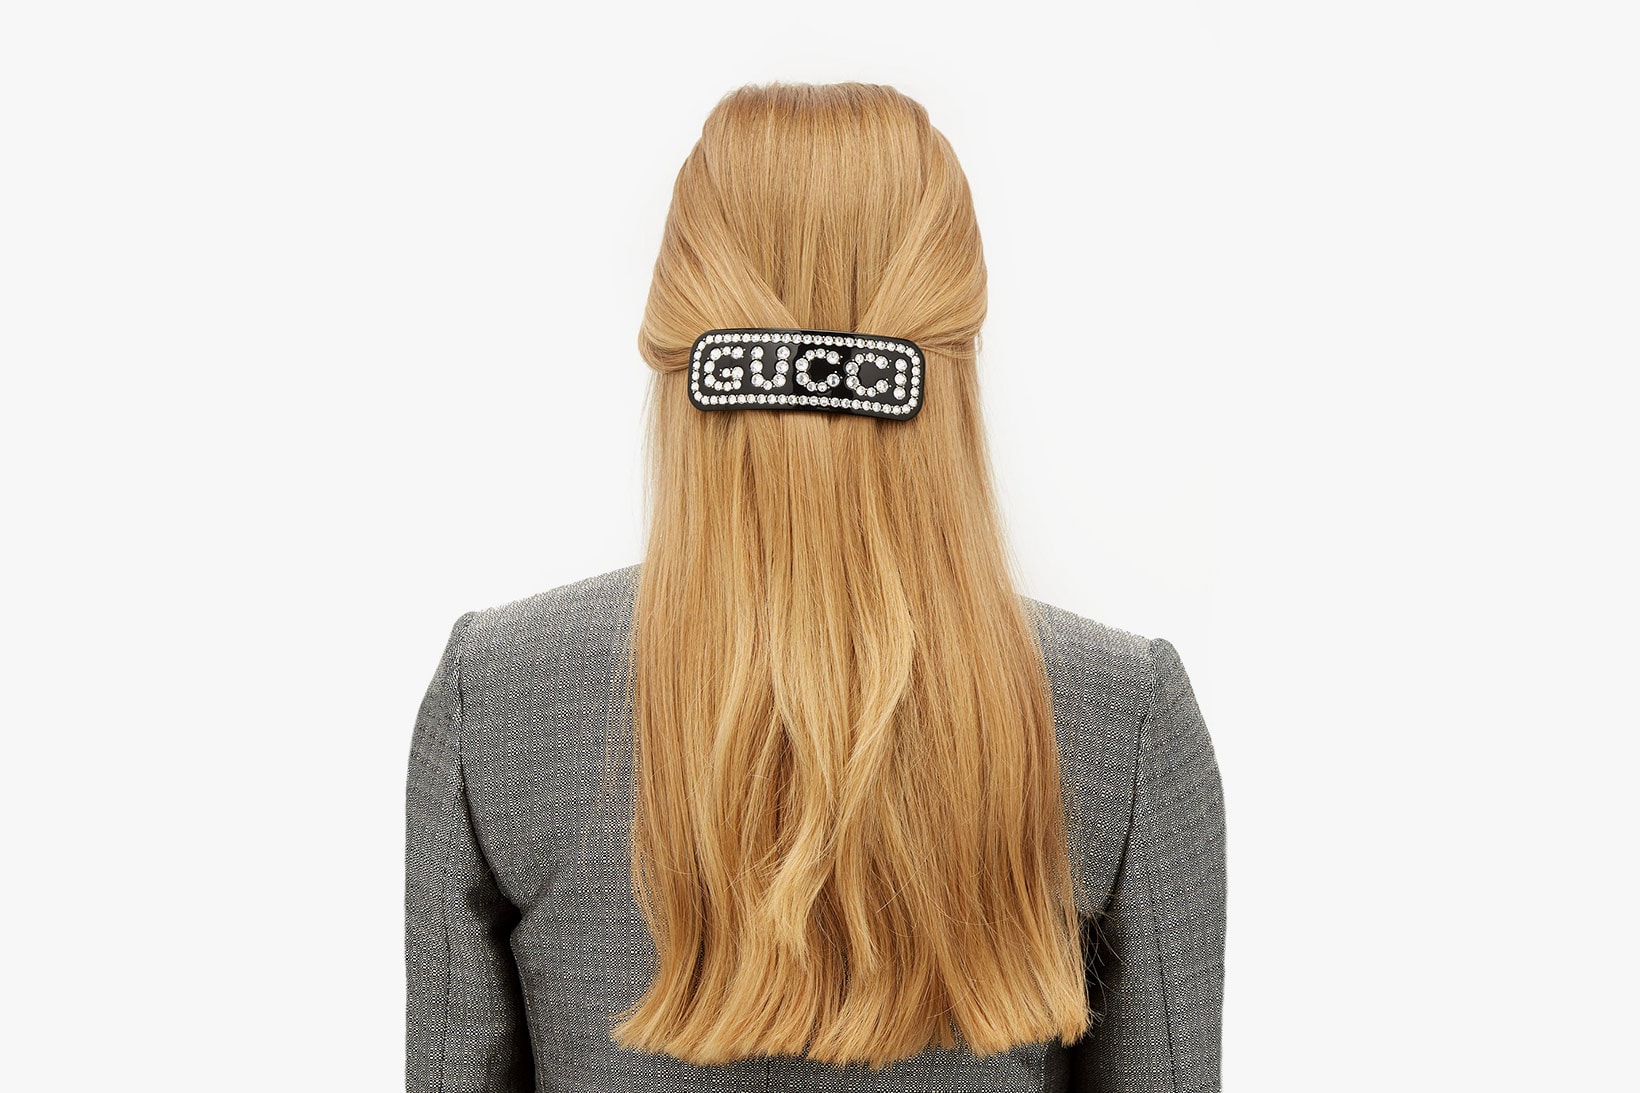 gucci logo hair slides crystals clips hairstyle brown black accessories